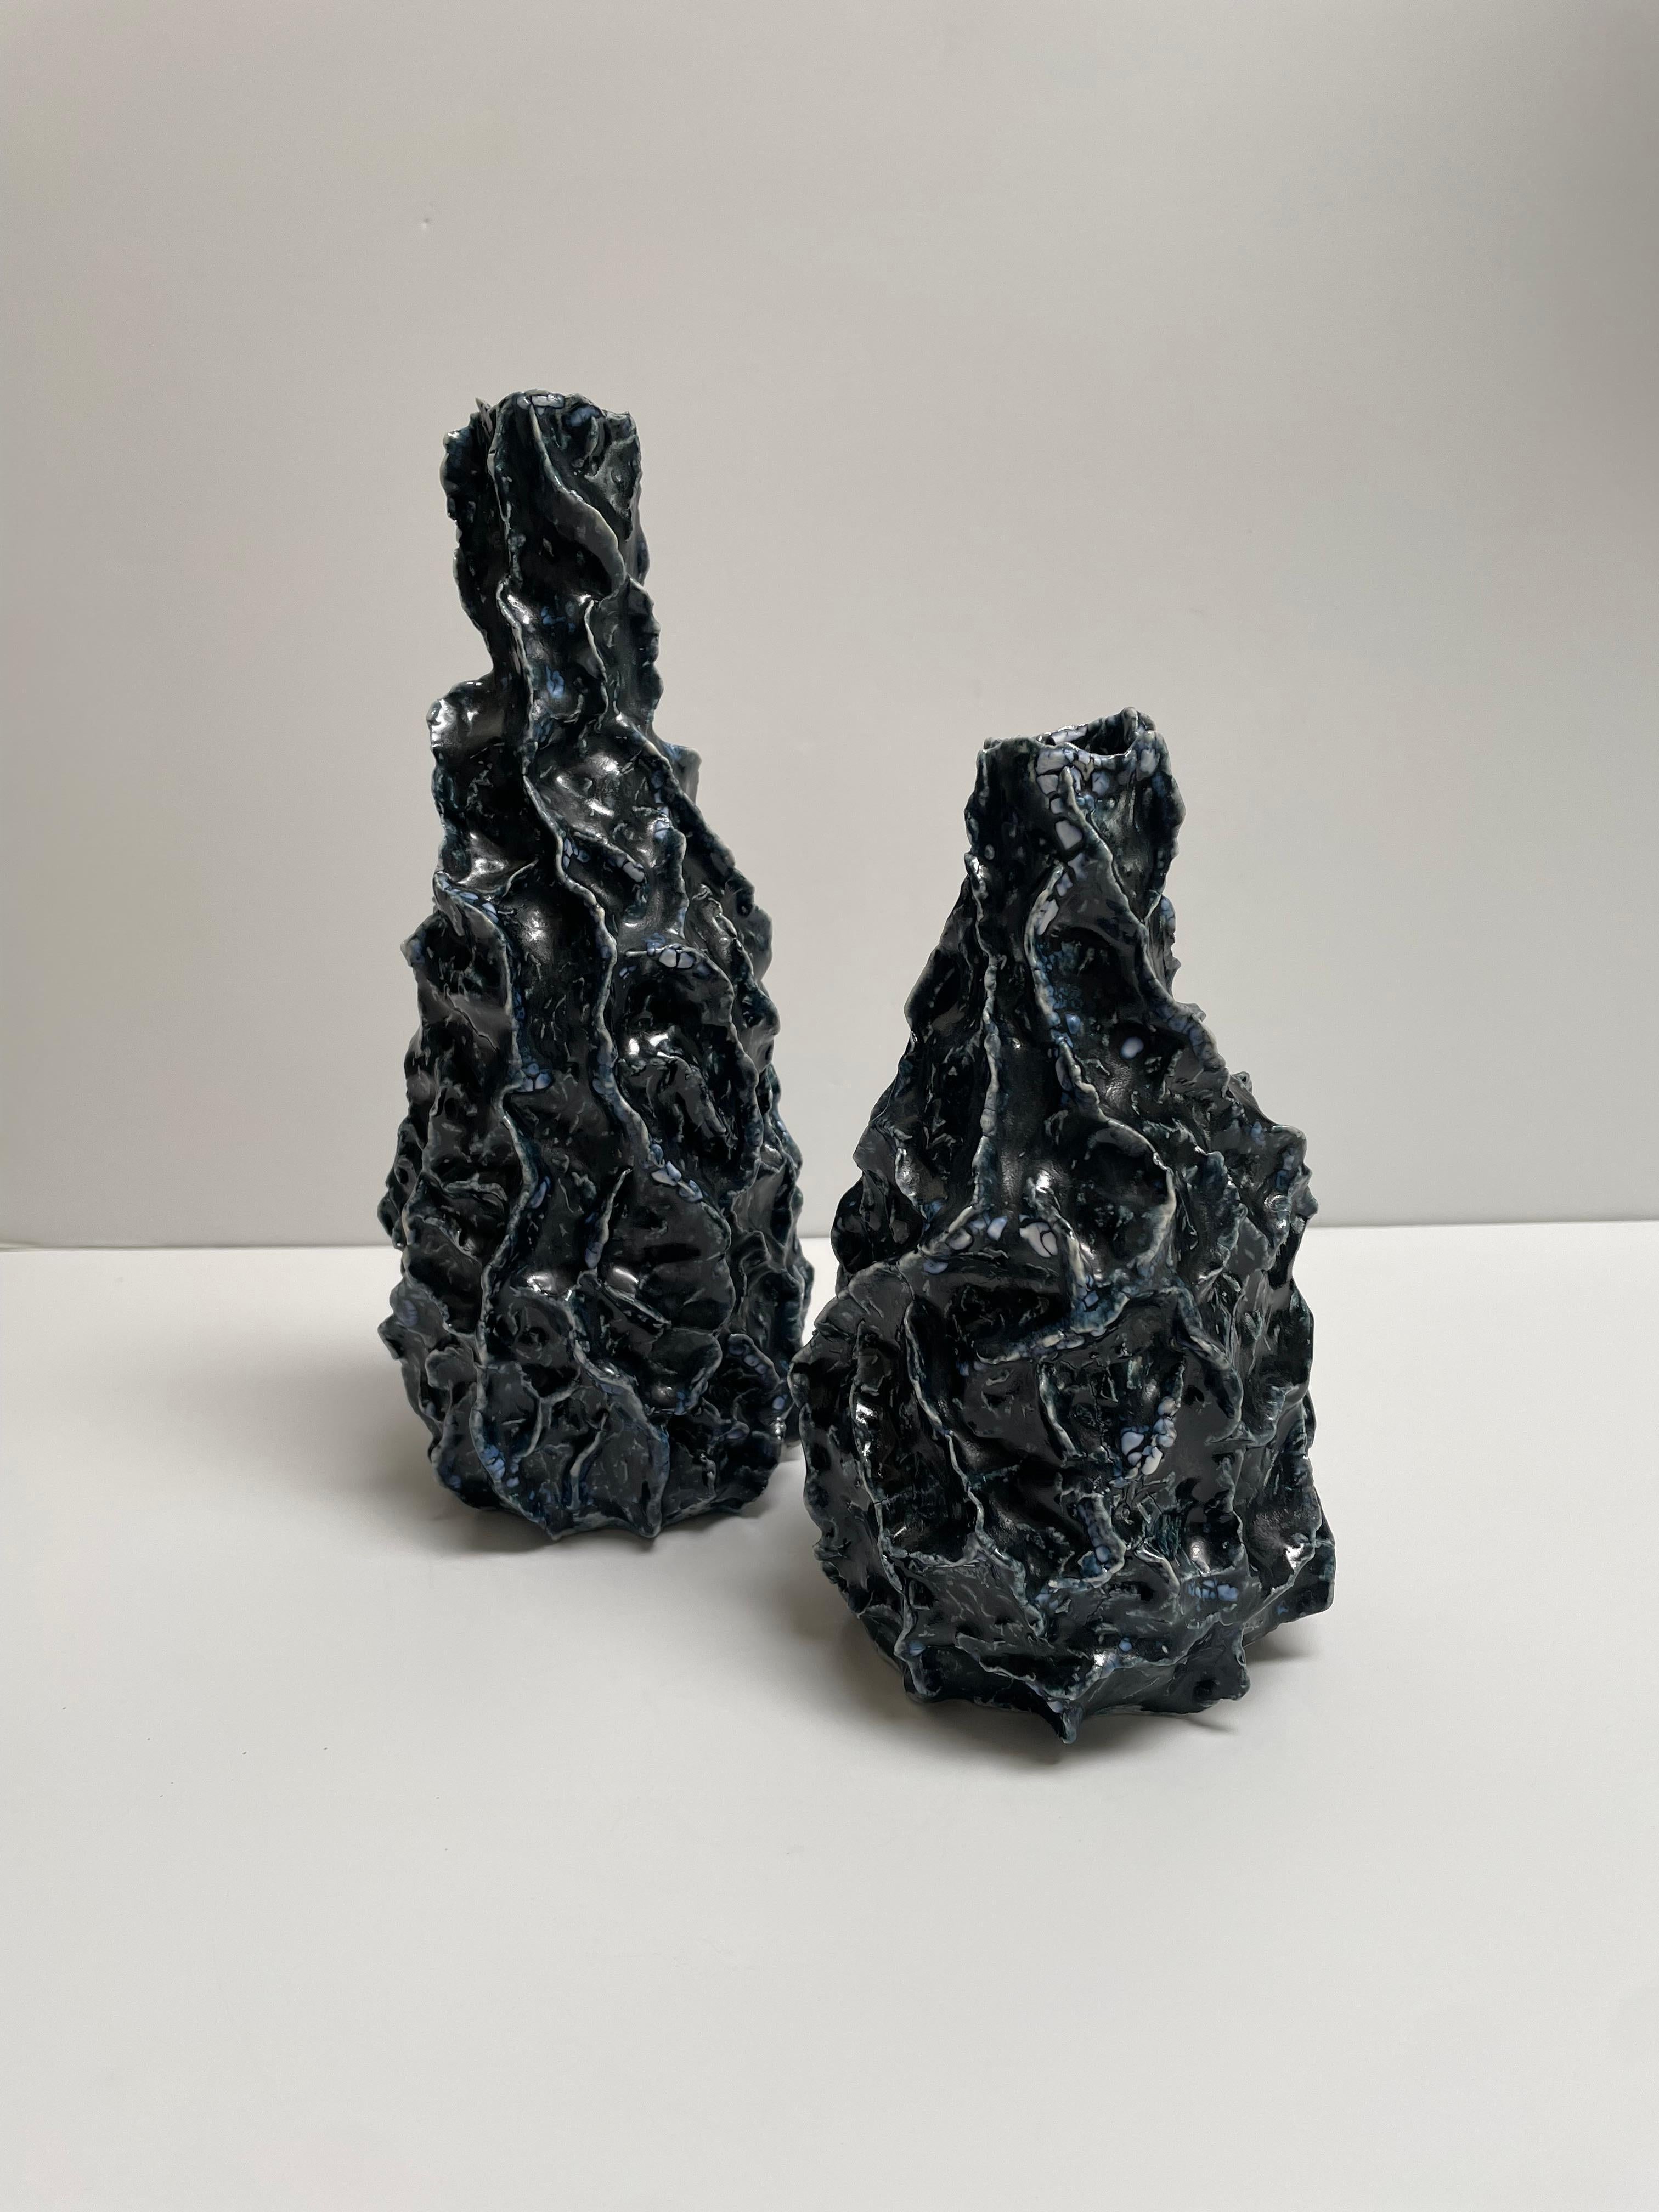 Ceramic Porcelain Vessel/Vase Sculptures:
Porcelain ceramic vessels, these ceramic art pieces have morphed from a two-year style that is evolving into a new style I am working and focusing on now. These pieces are created from clay coils, then